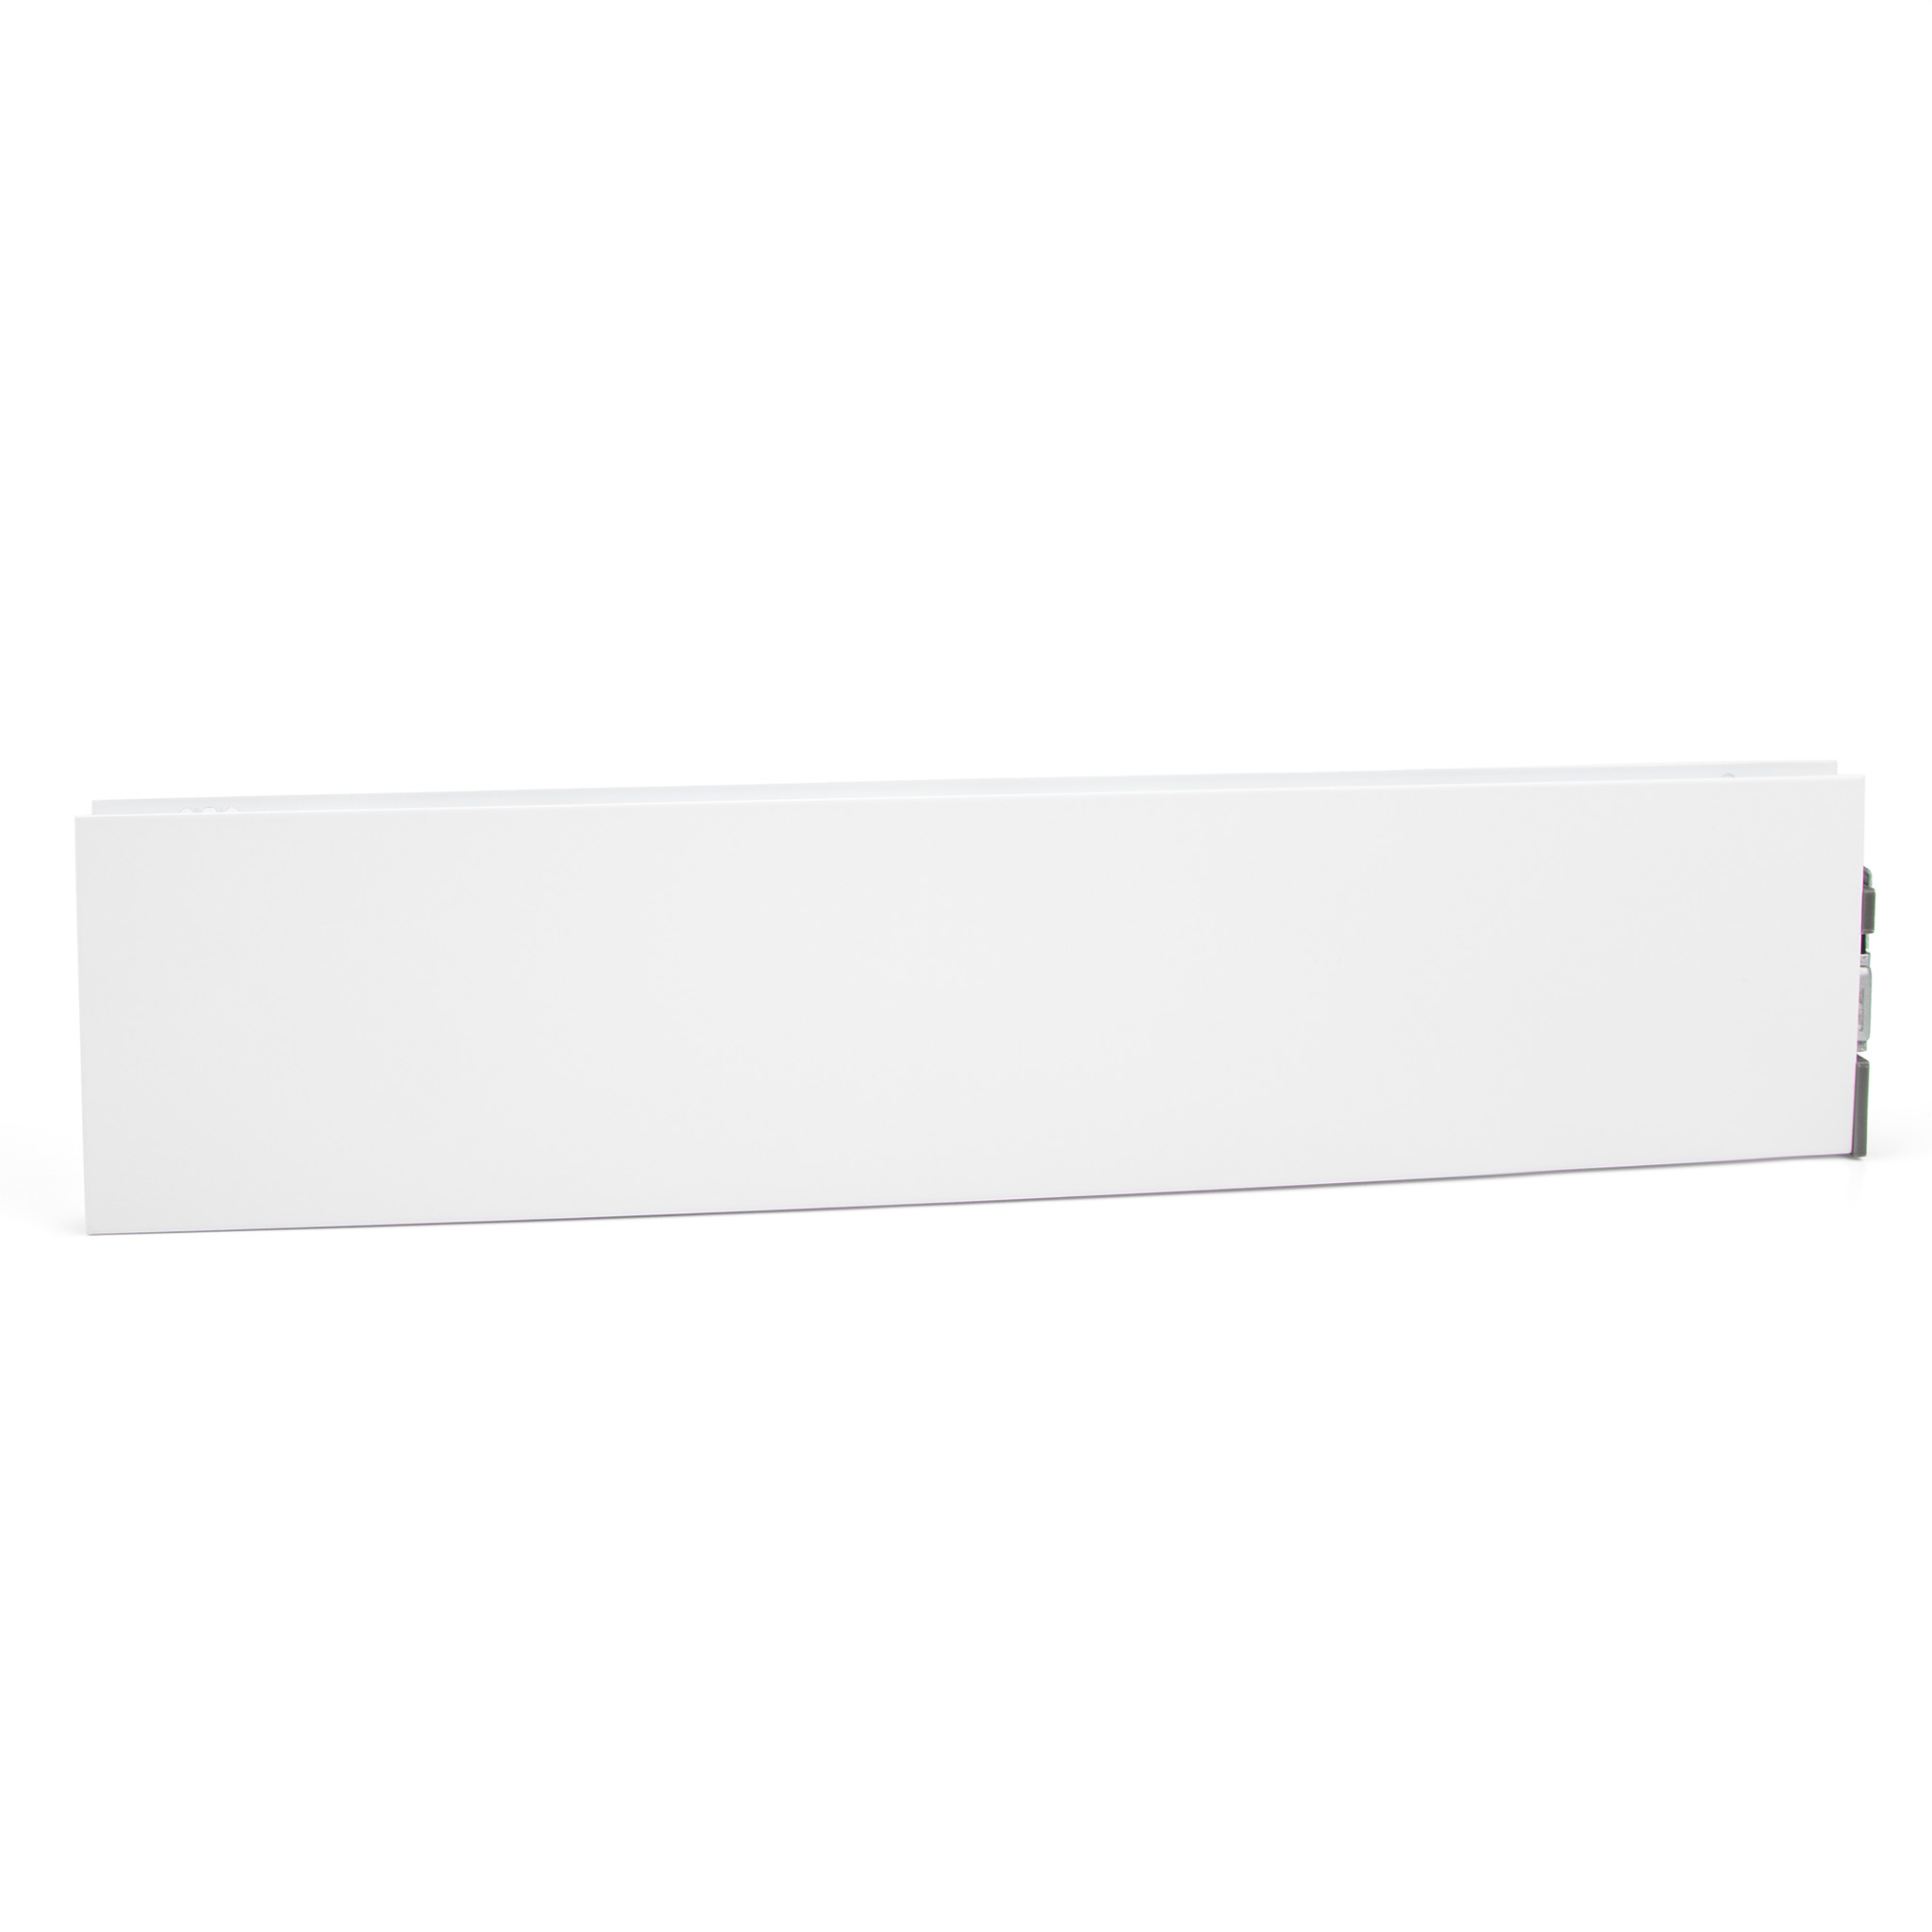 M-Series Fusion Side Wall, 500mm Length, 88mm Height, Lunar White